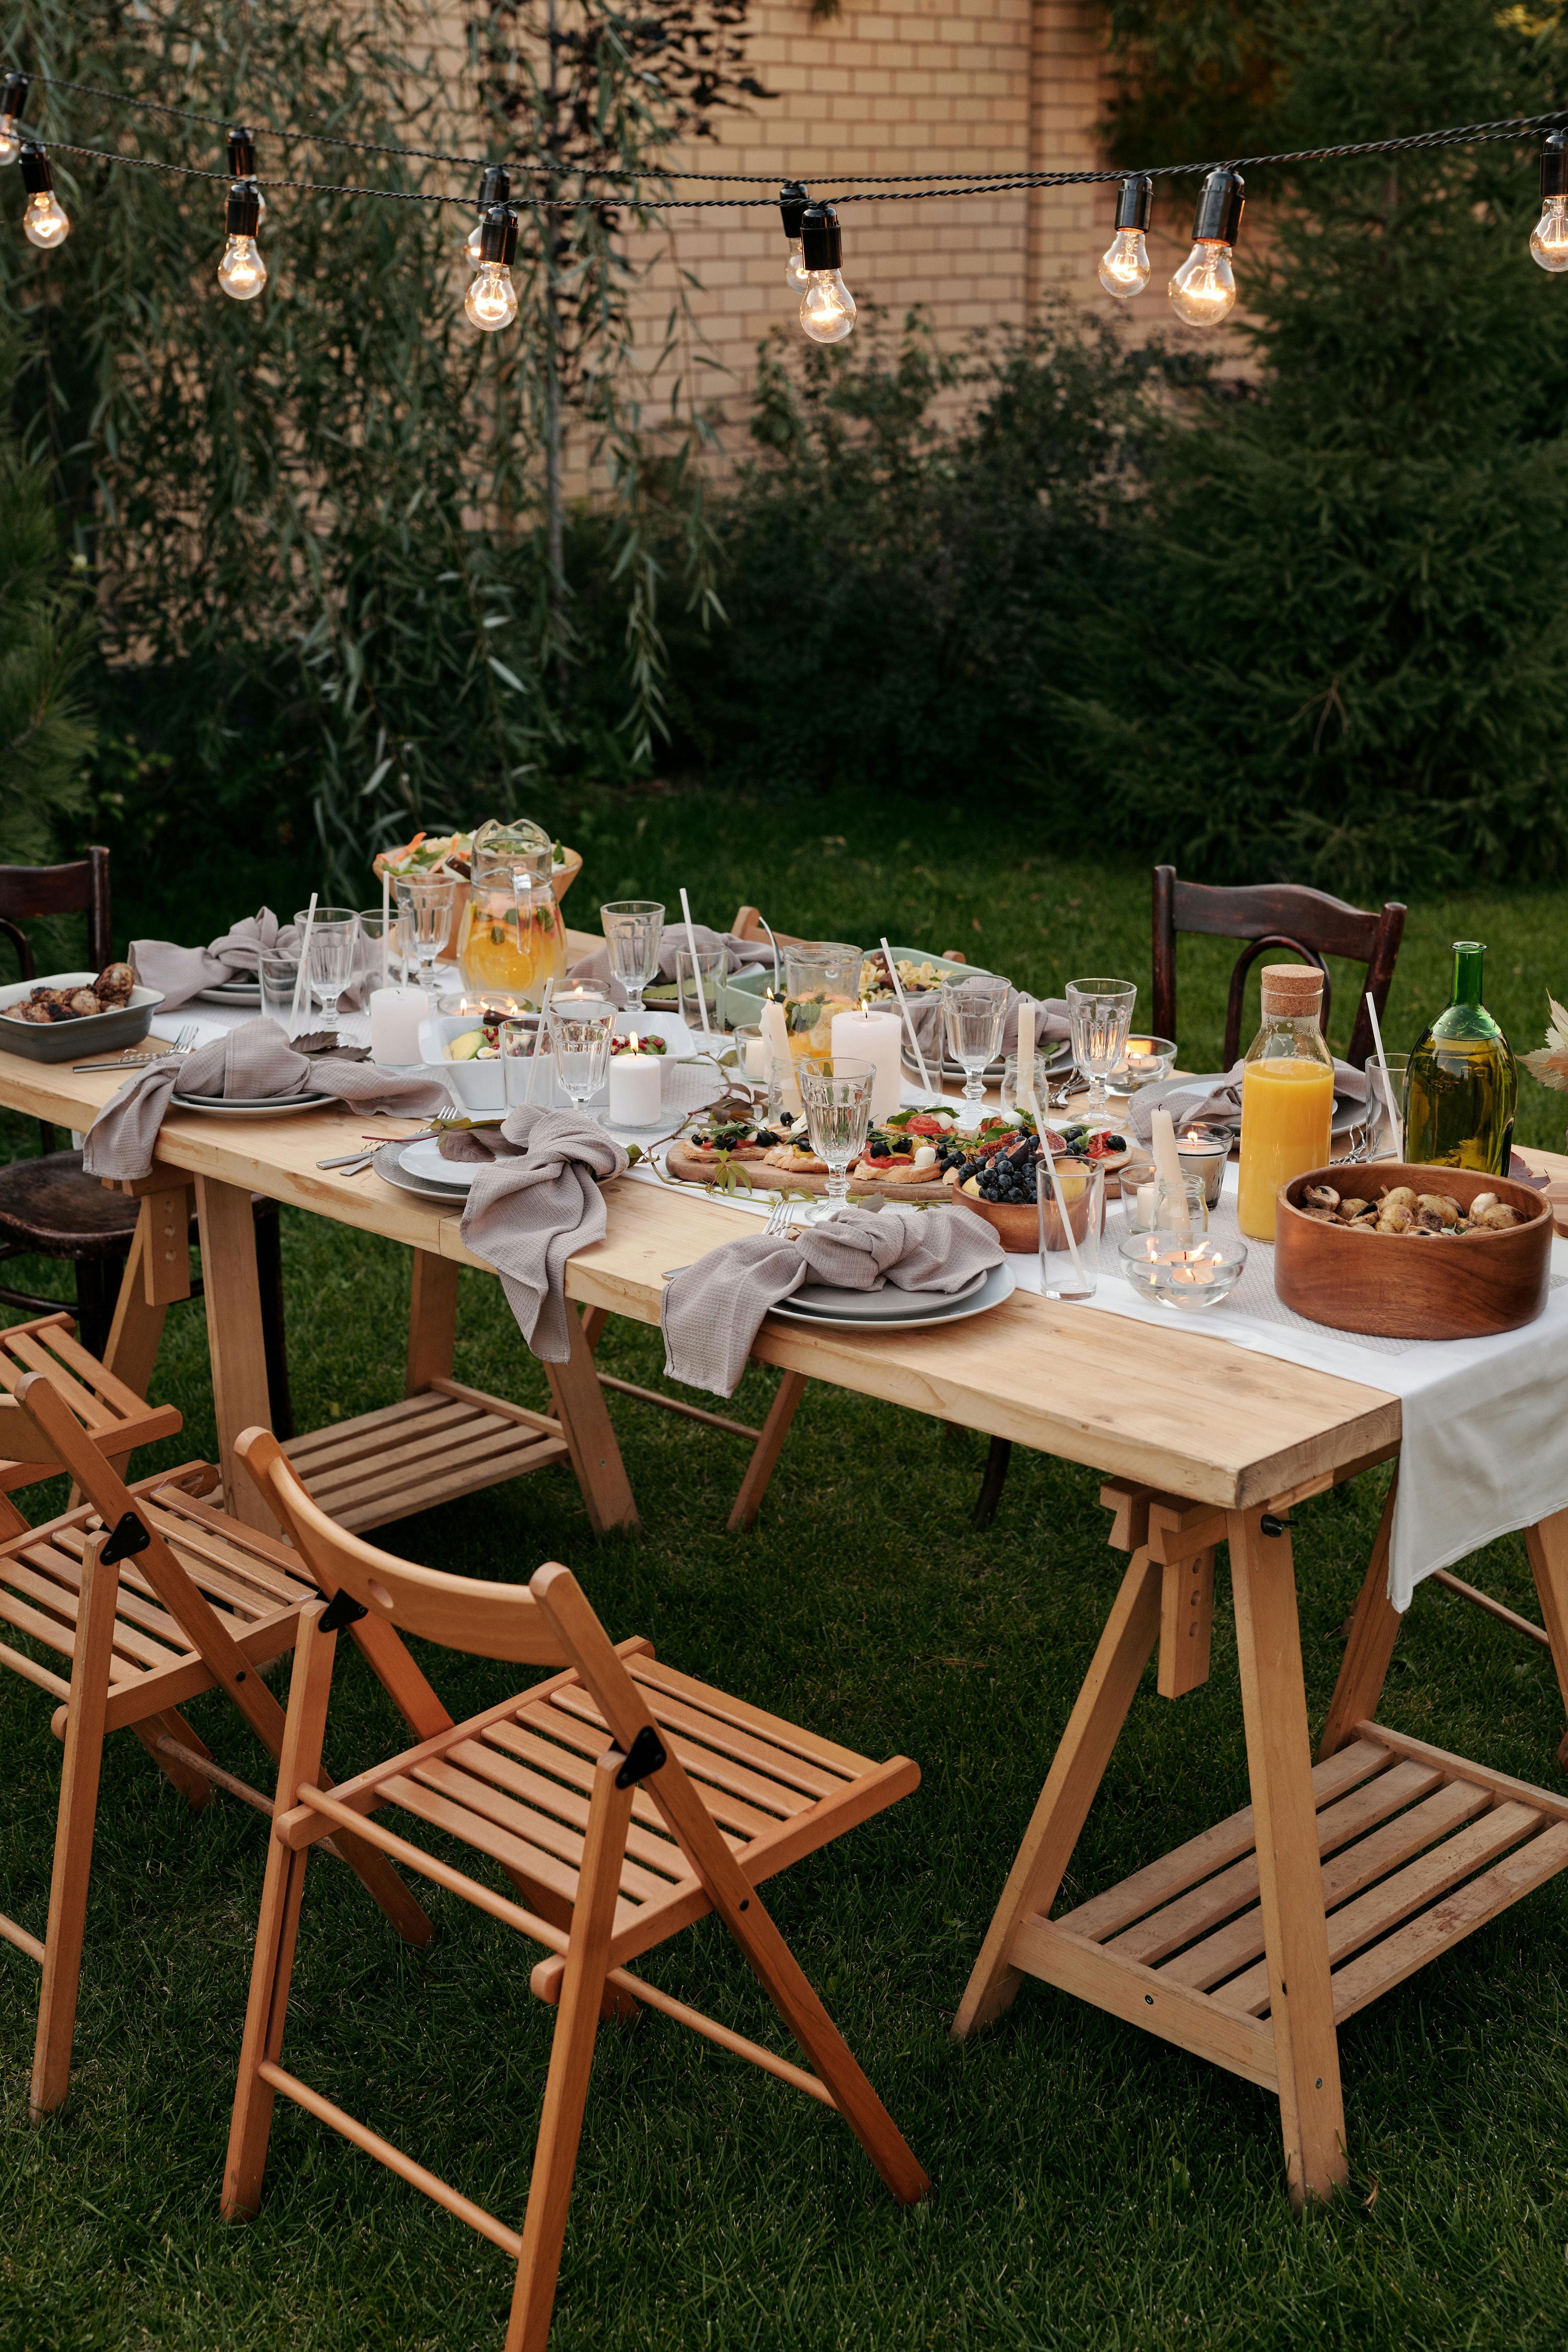 Al fresco parties are on the way – here’s everything you need to get hosting